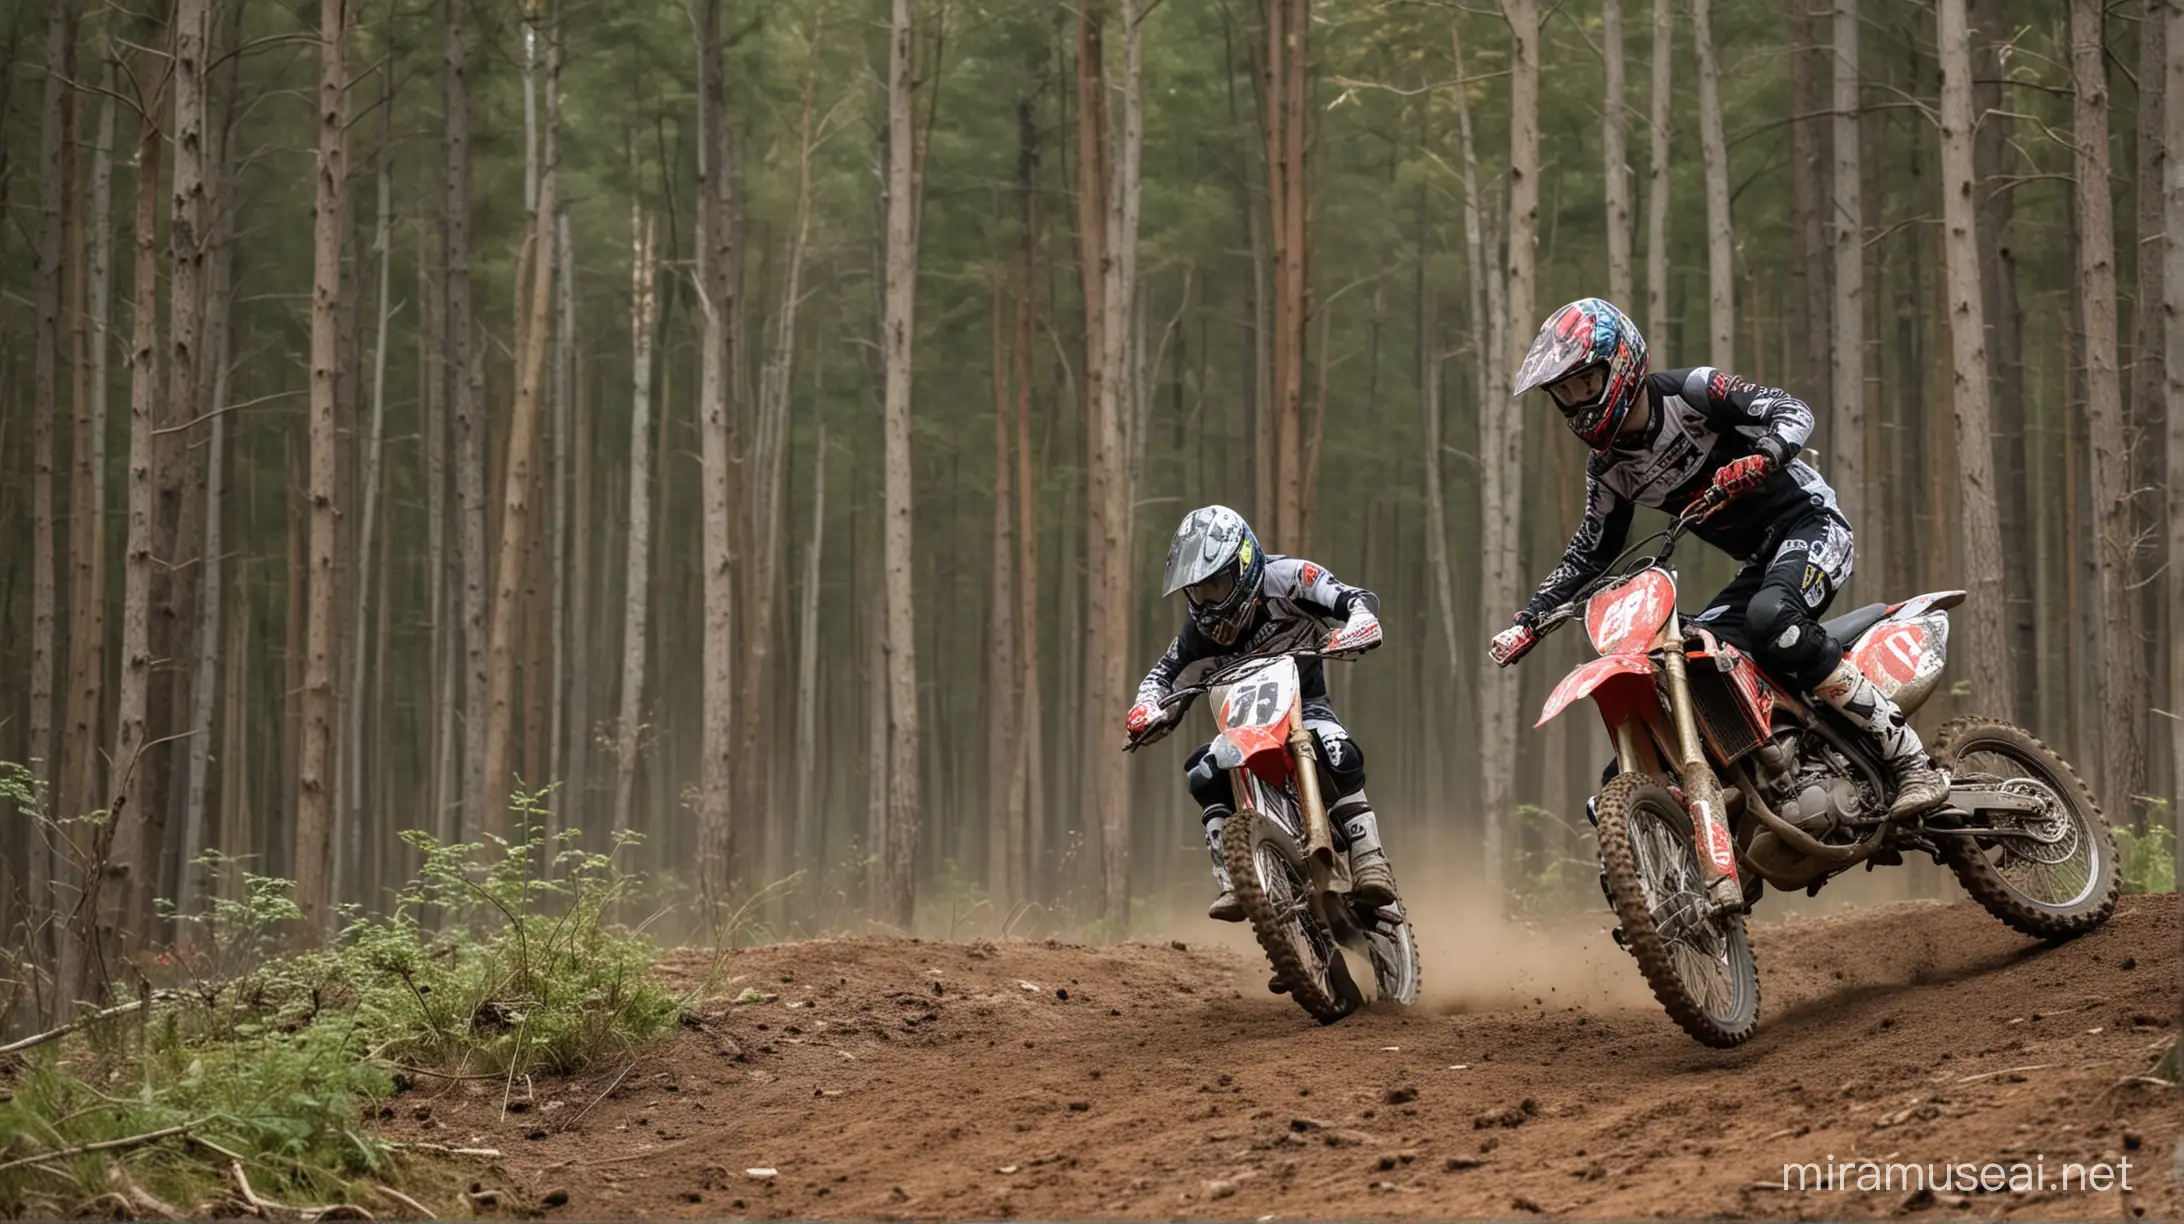 Adventurous Youth Motocross Exploration in the Forest